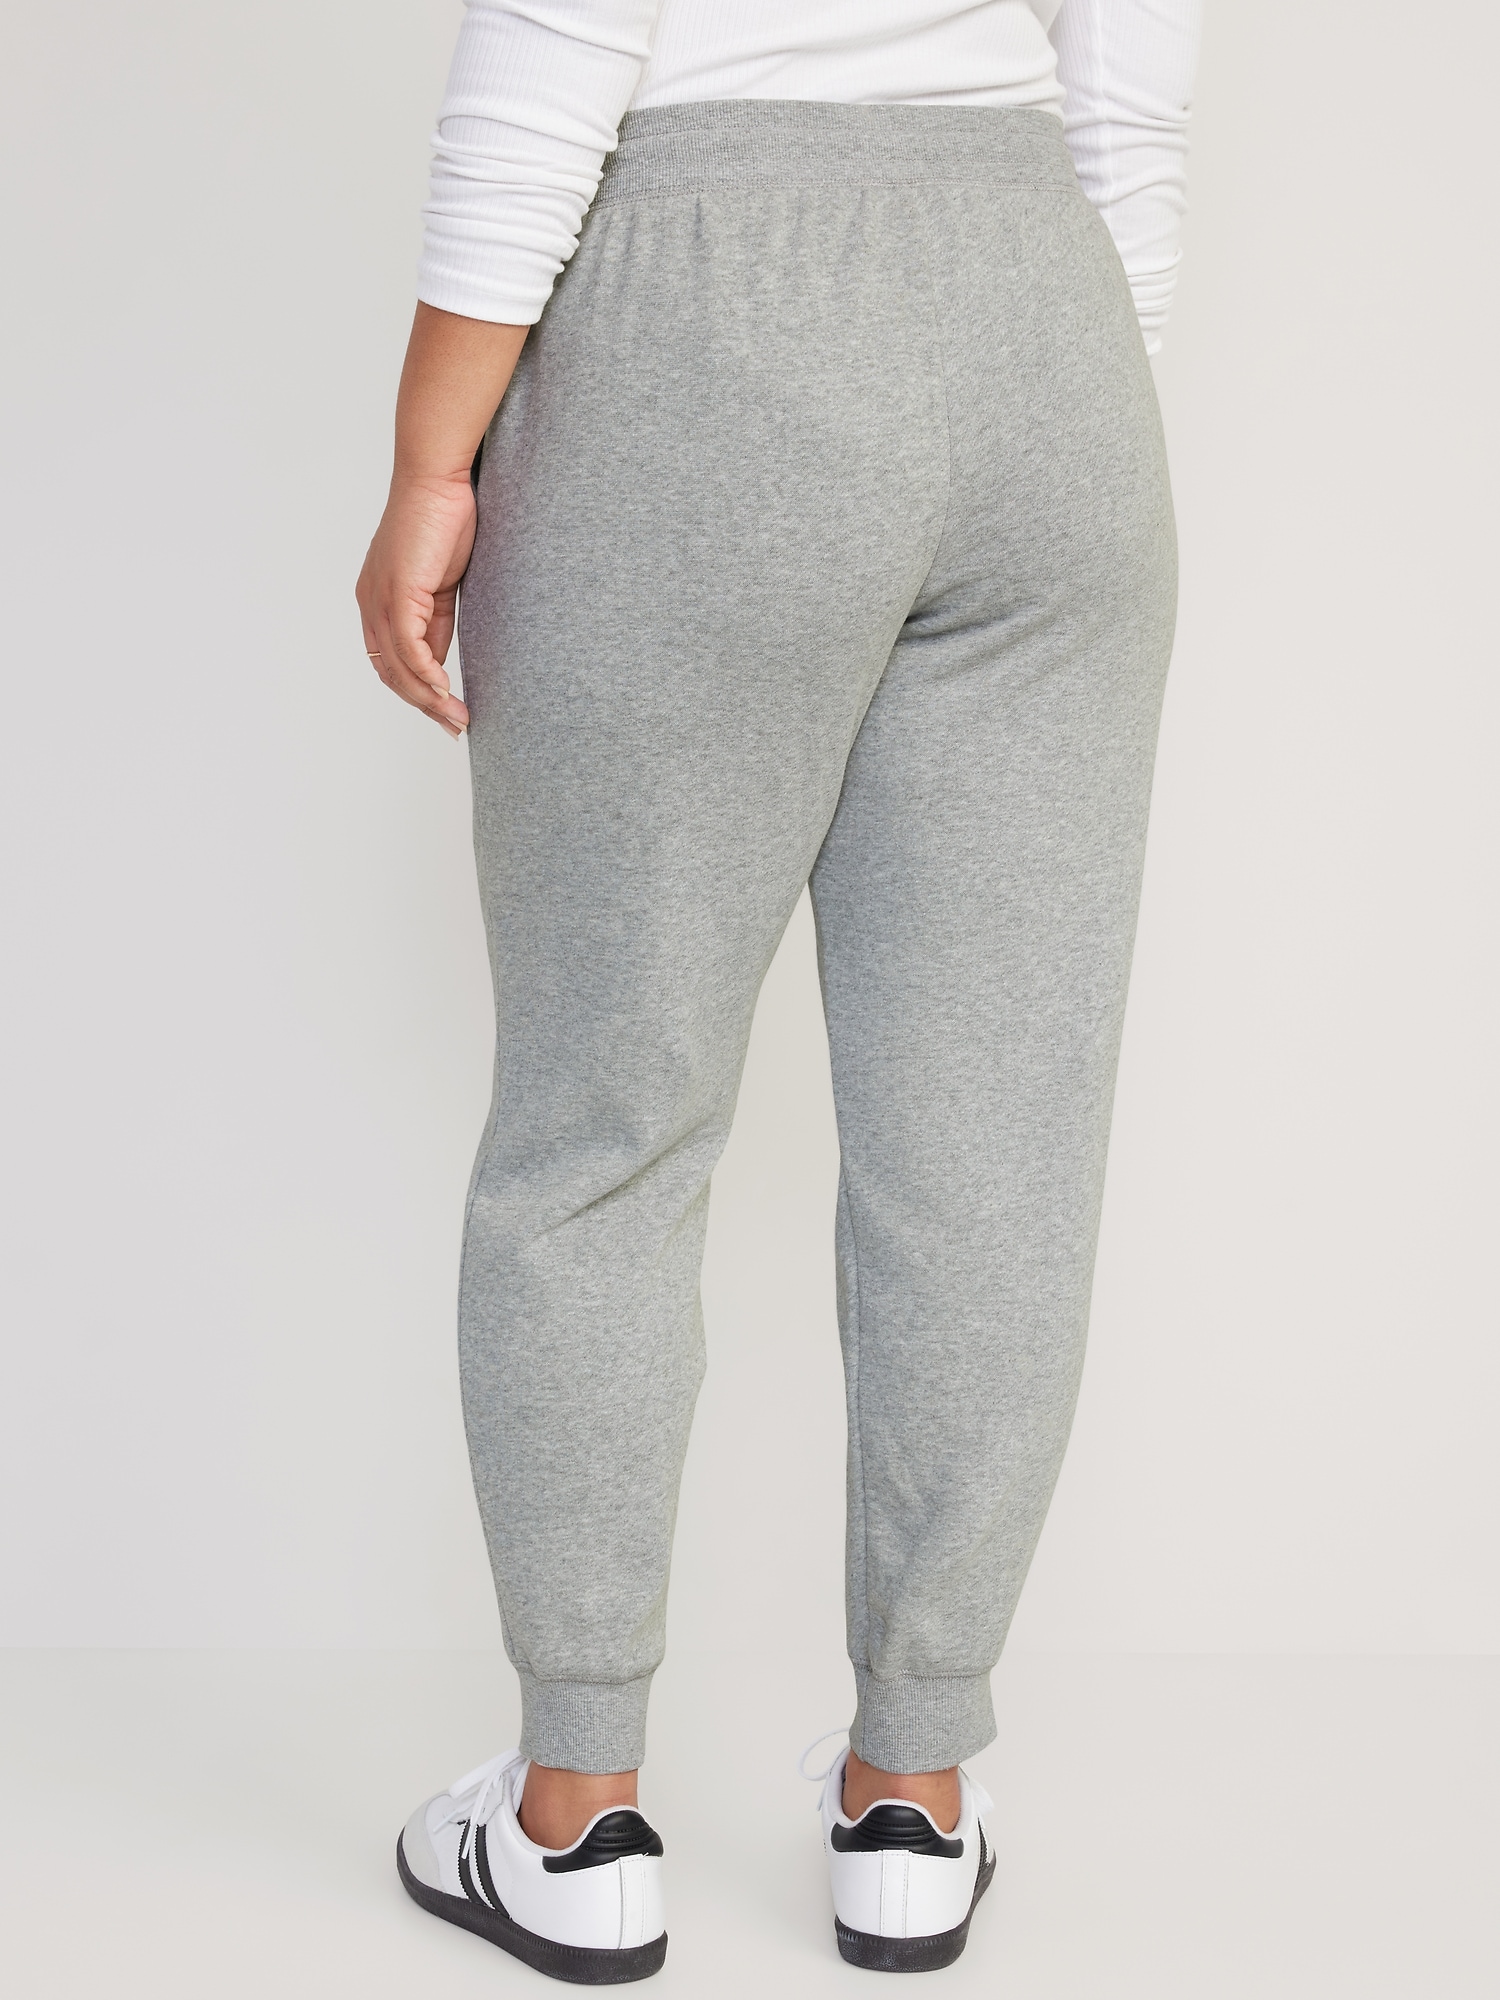 Old Navy Women's Mid-Rise Vintage Street Joggers Sweatpants Gray